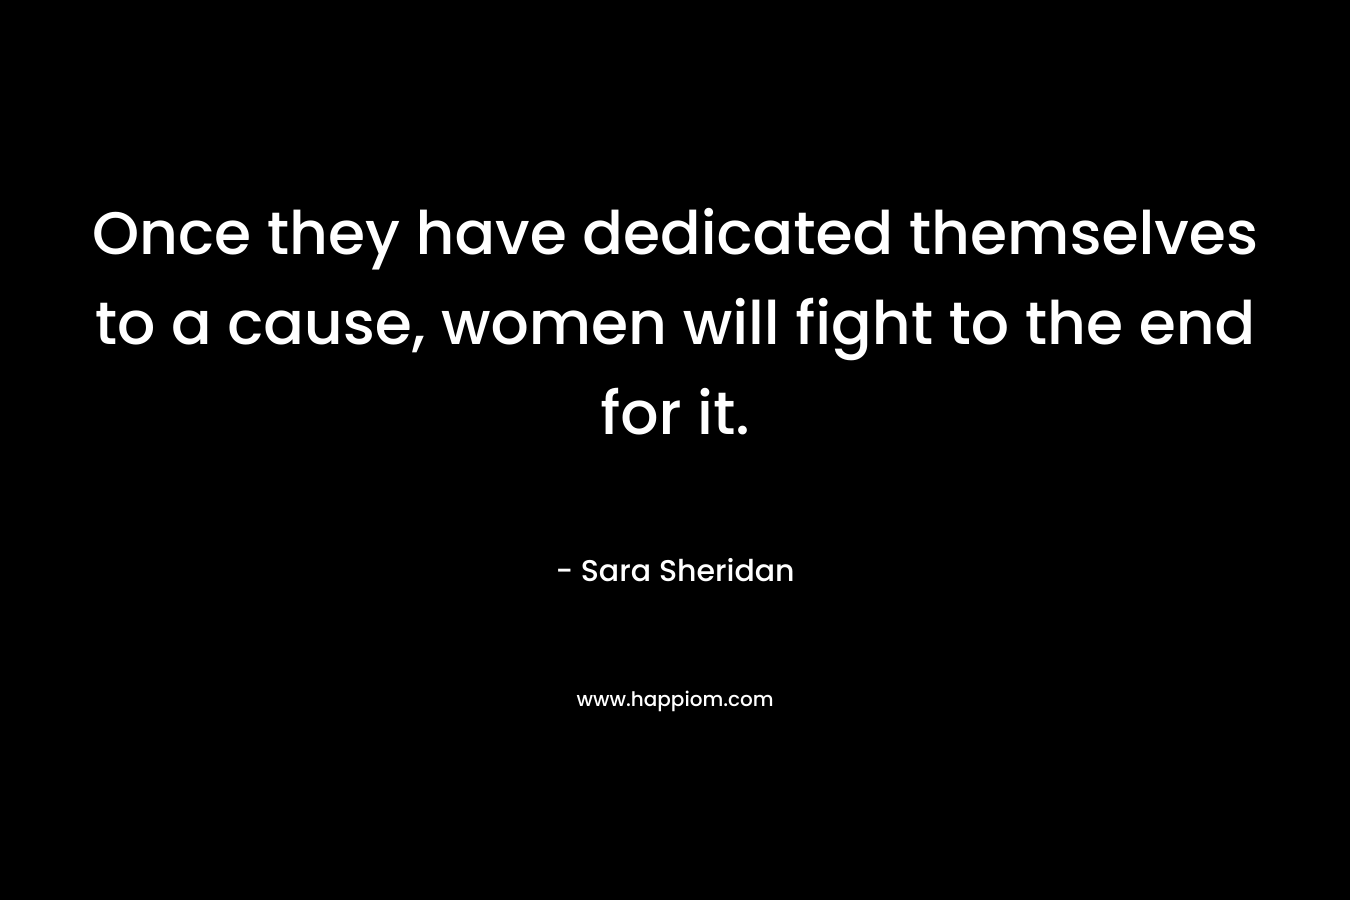 Once they have dedicated themselves to a cause, women will fight to the end for it. – Sara Sheridan